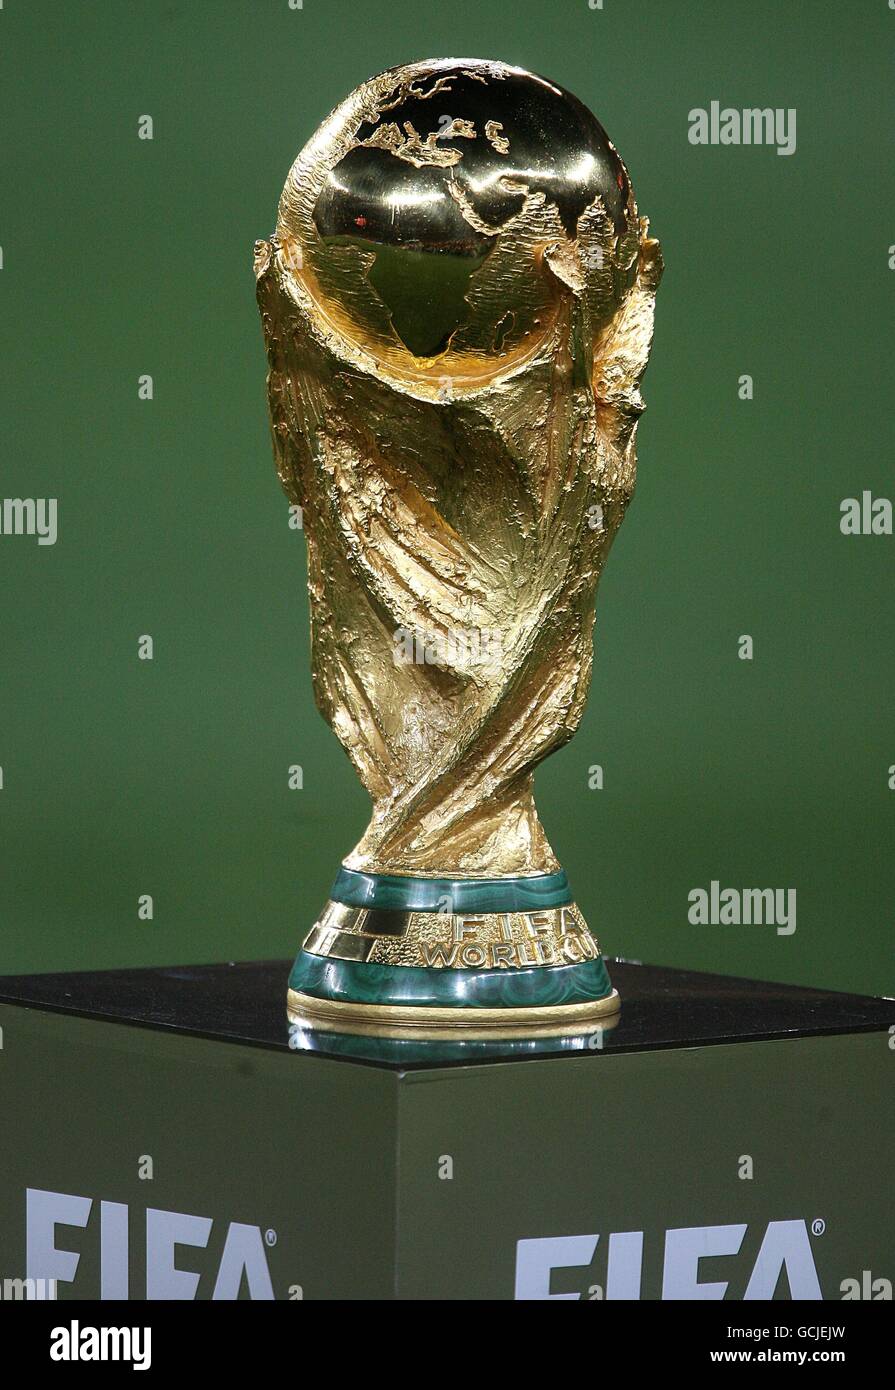 Soccer - 2010 FIFA World Cup South Africa - Final - Netherlands v Spain - Soccer City Stadium. The World Cup Trophy on its plinth Stock Photo